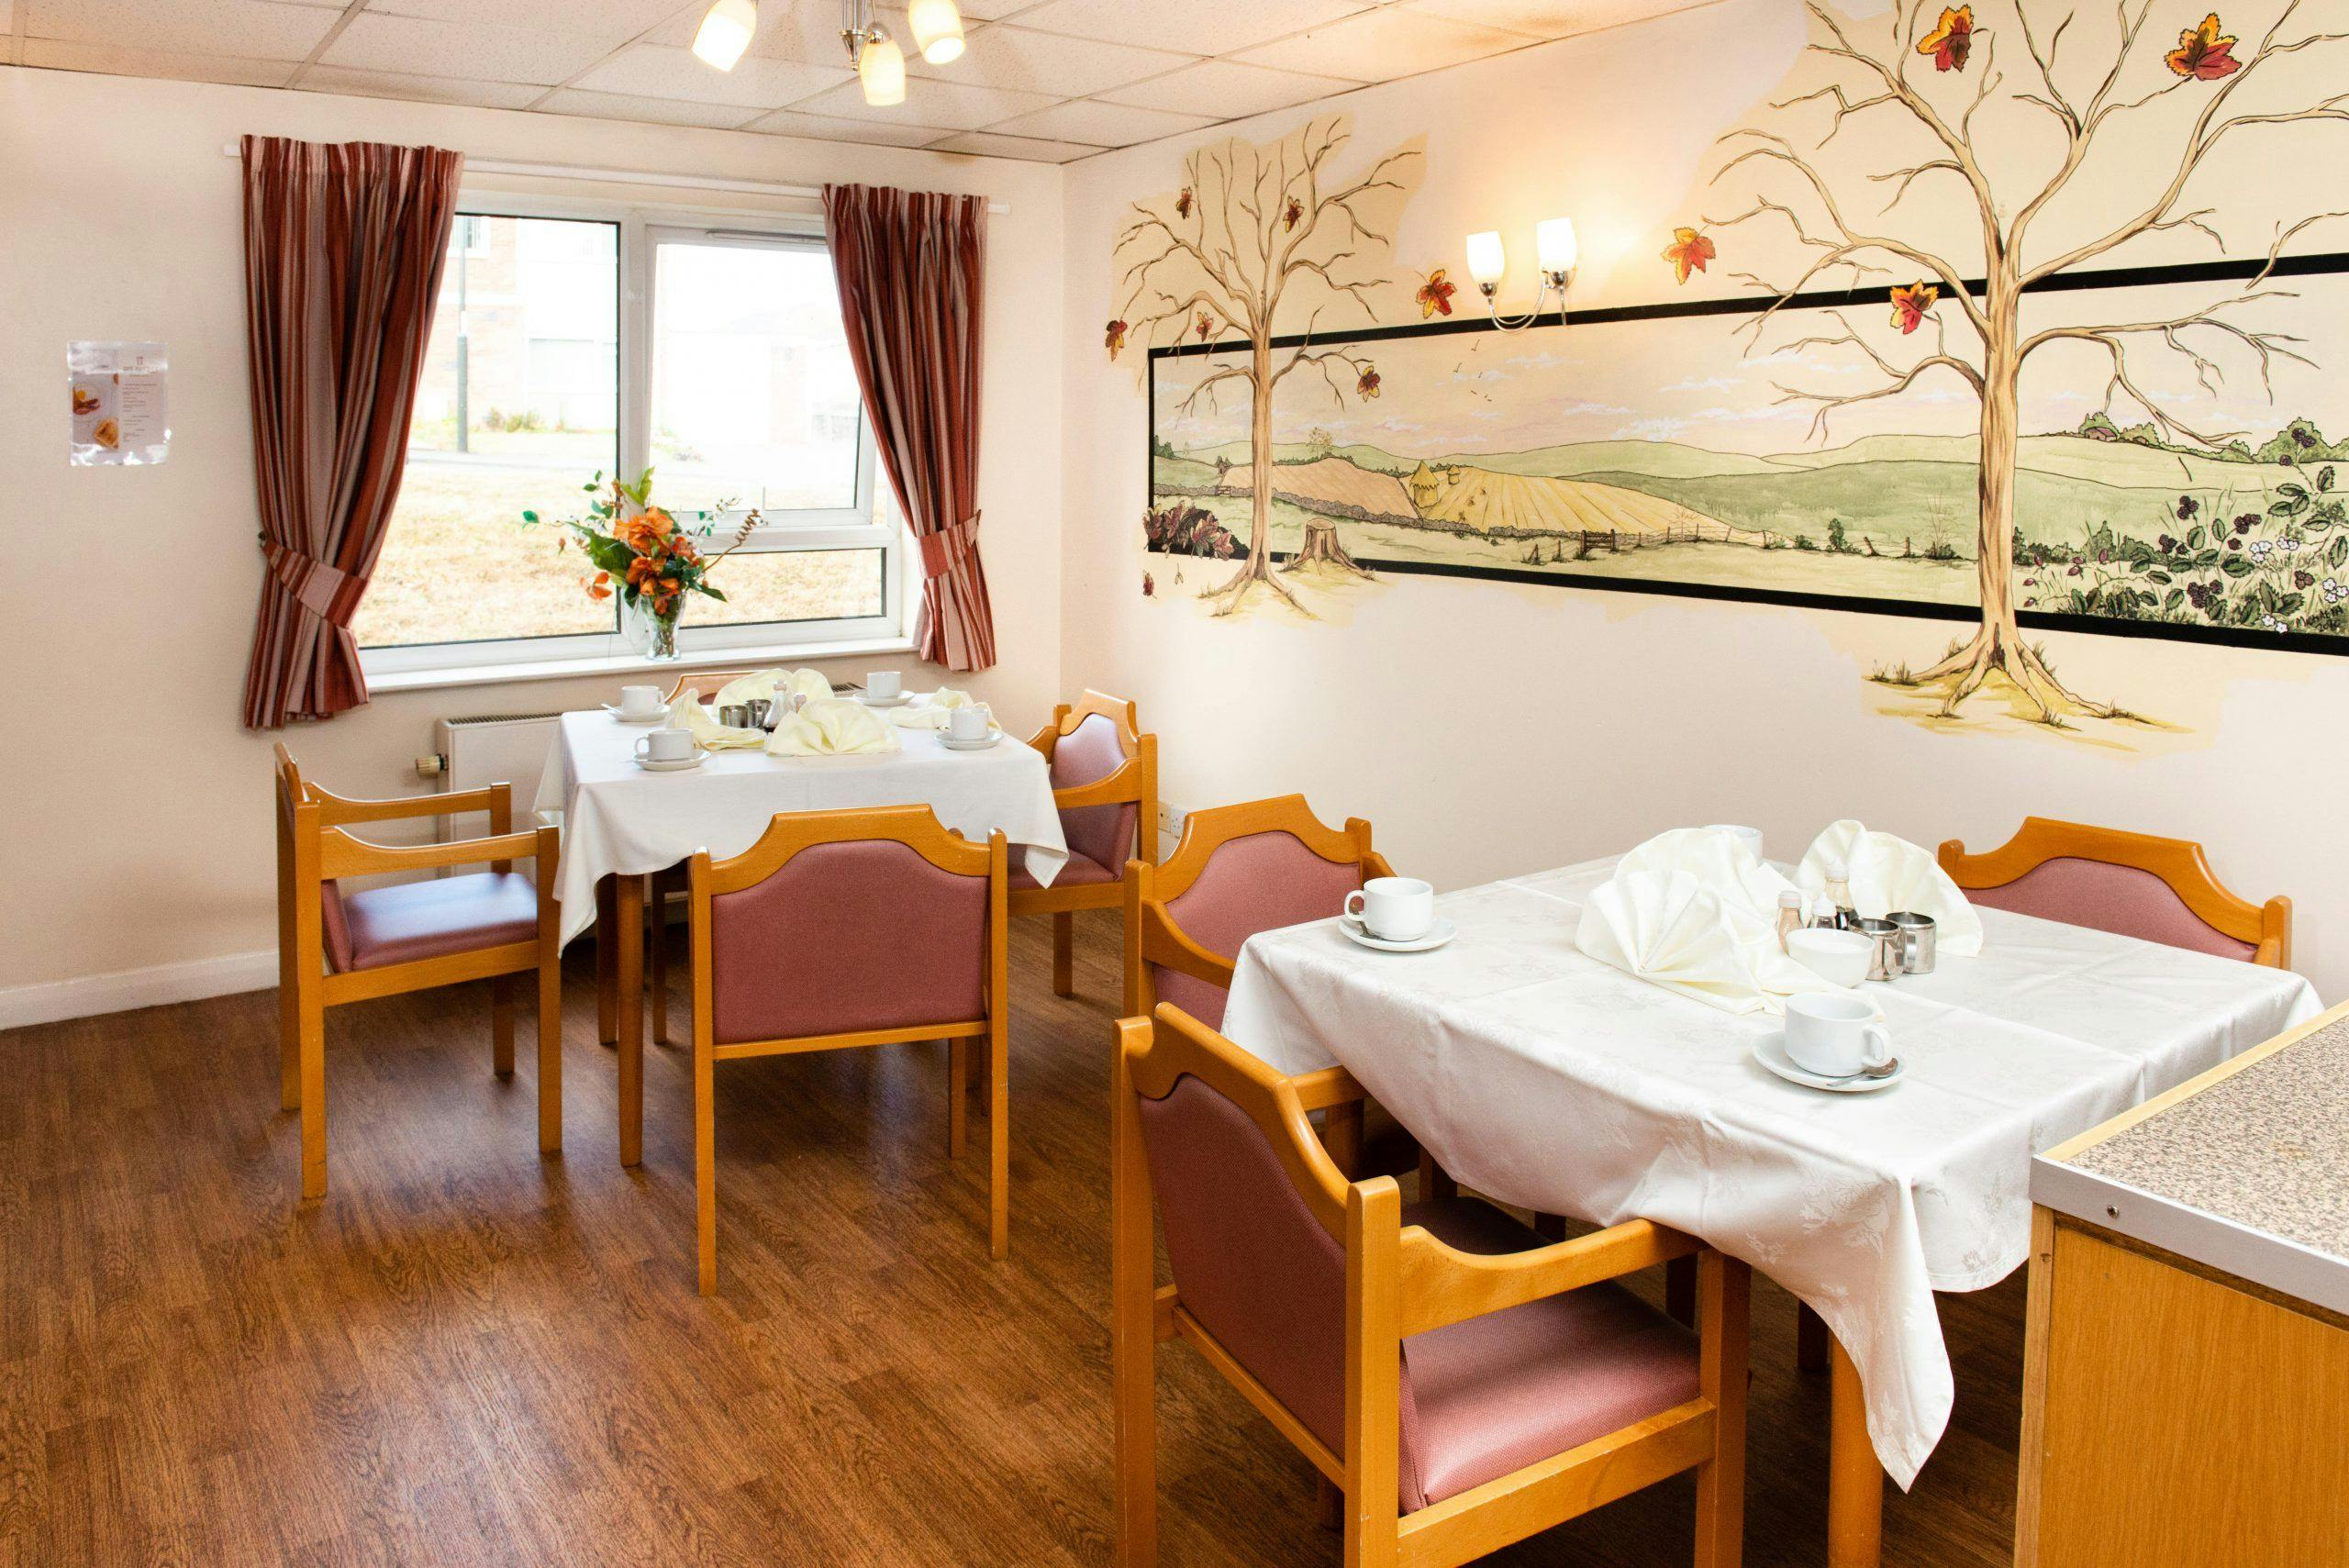 Dining area of Codnor Park Care Home in Ripley, Derbyshire